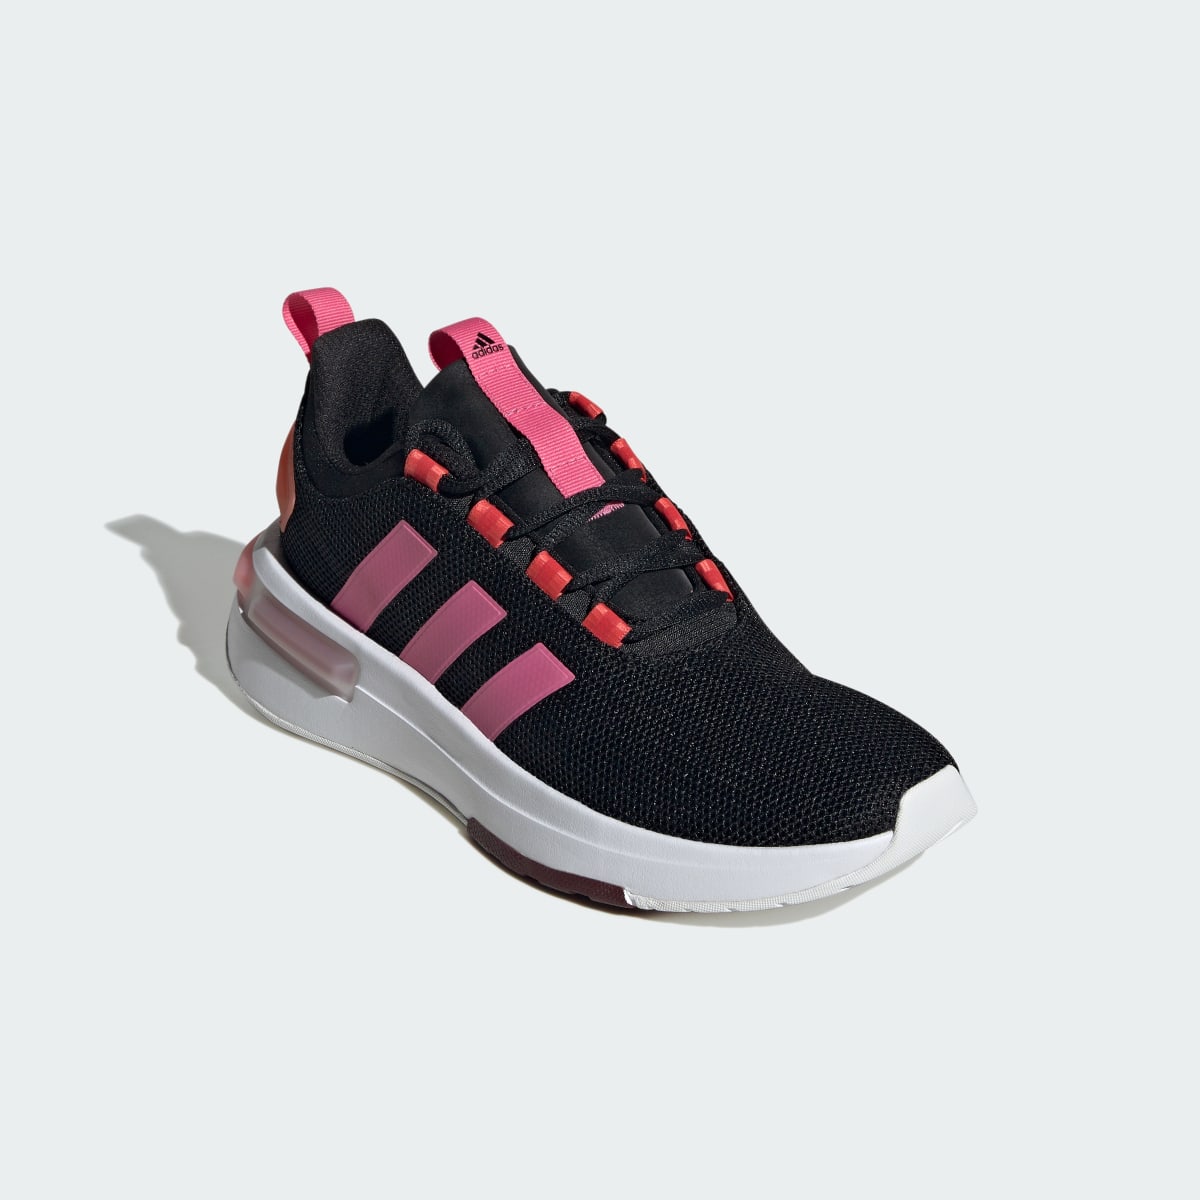 Adidas Chaussure Racer TR23. 5